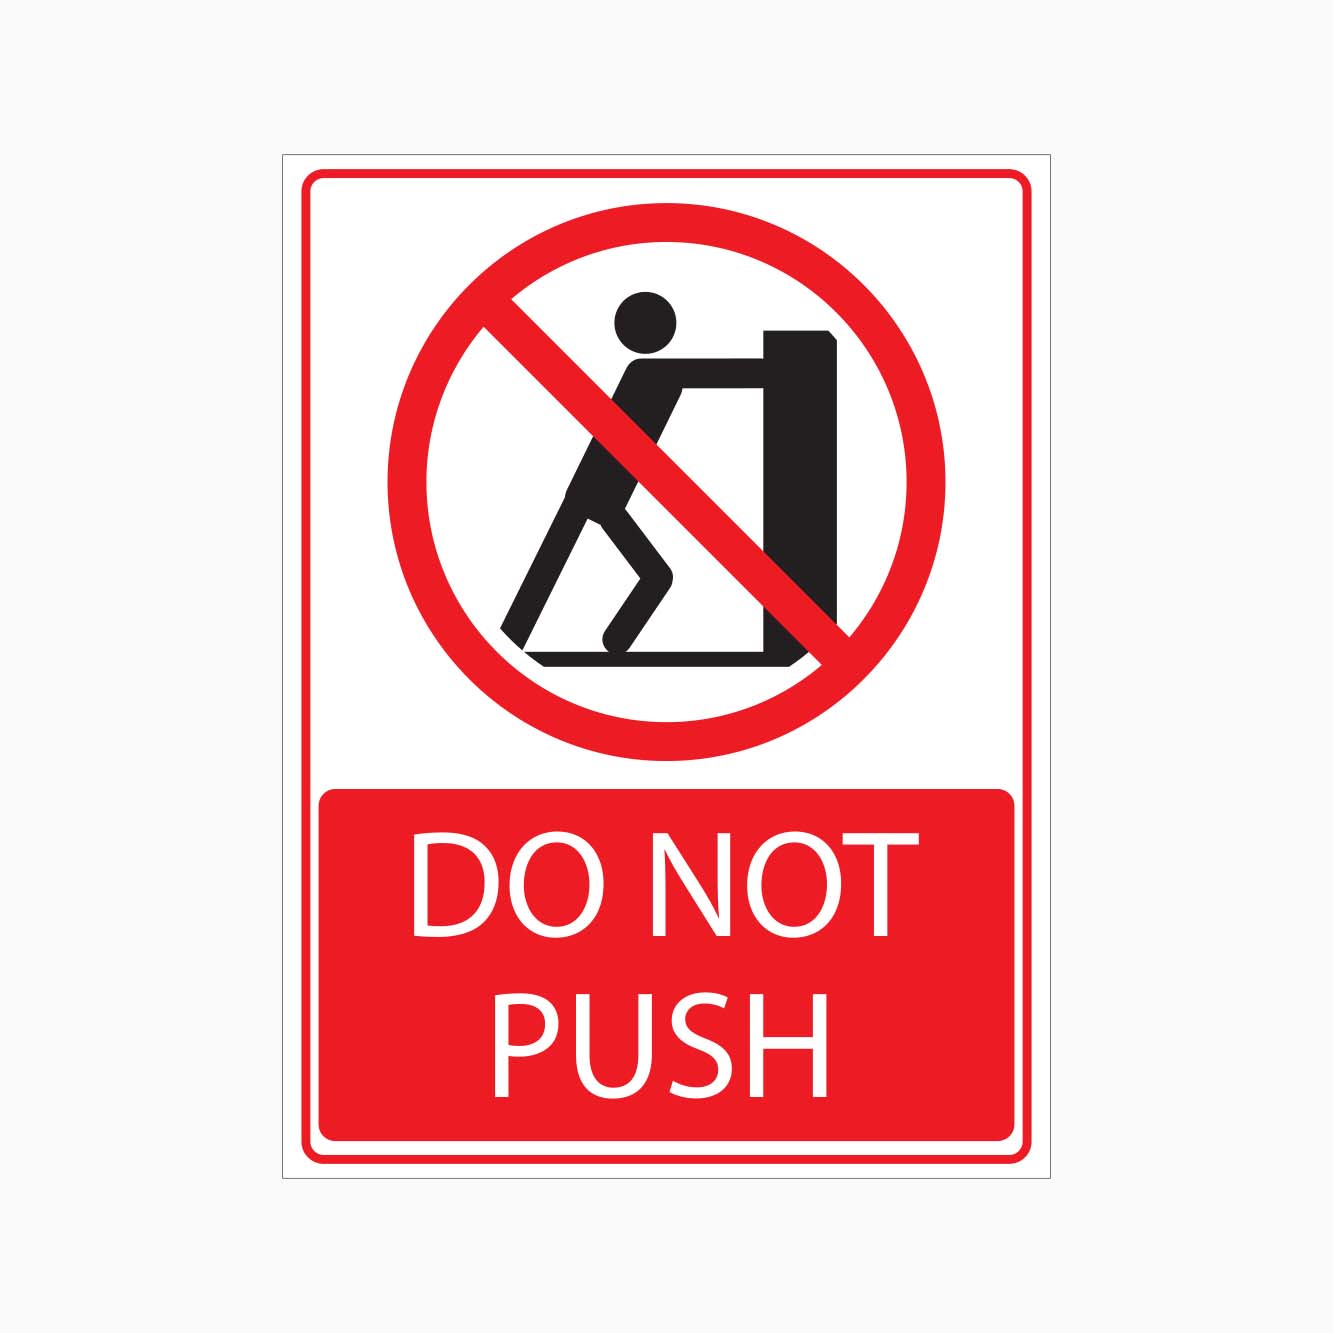 DO NOT PUSH SIGN - GET SIGNS